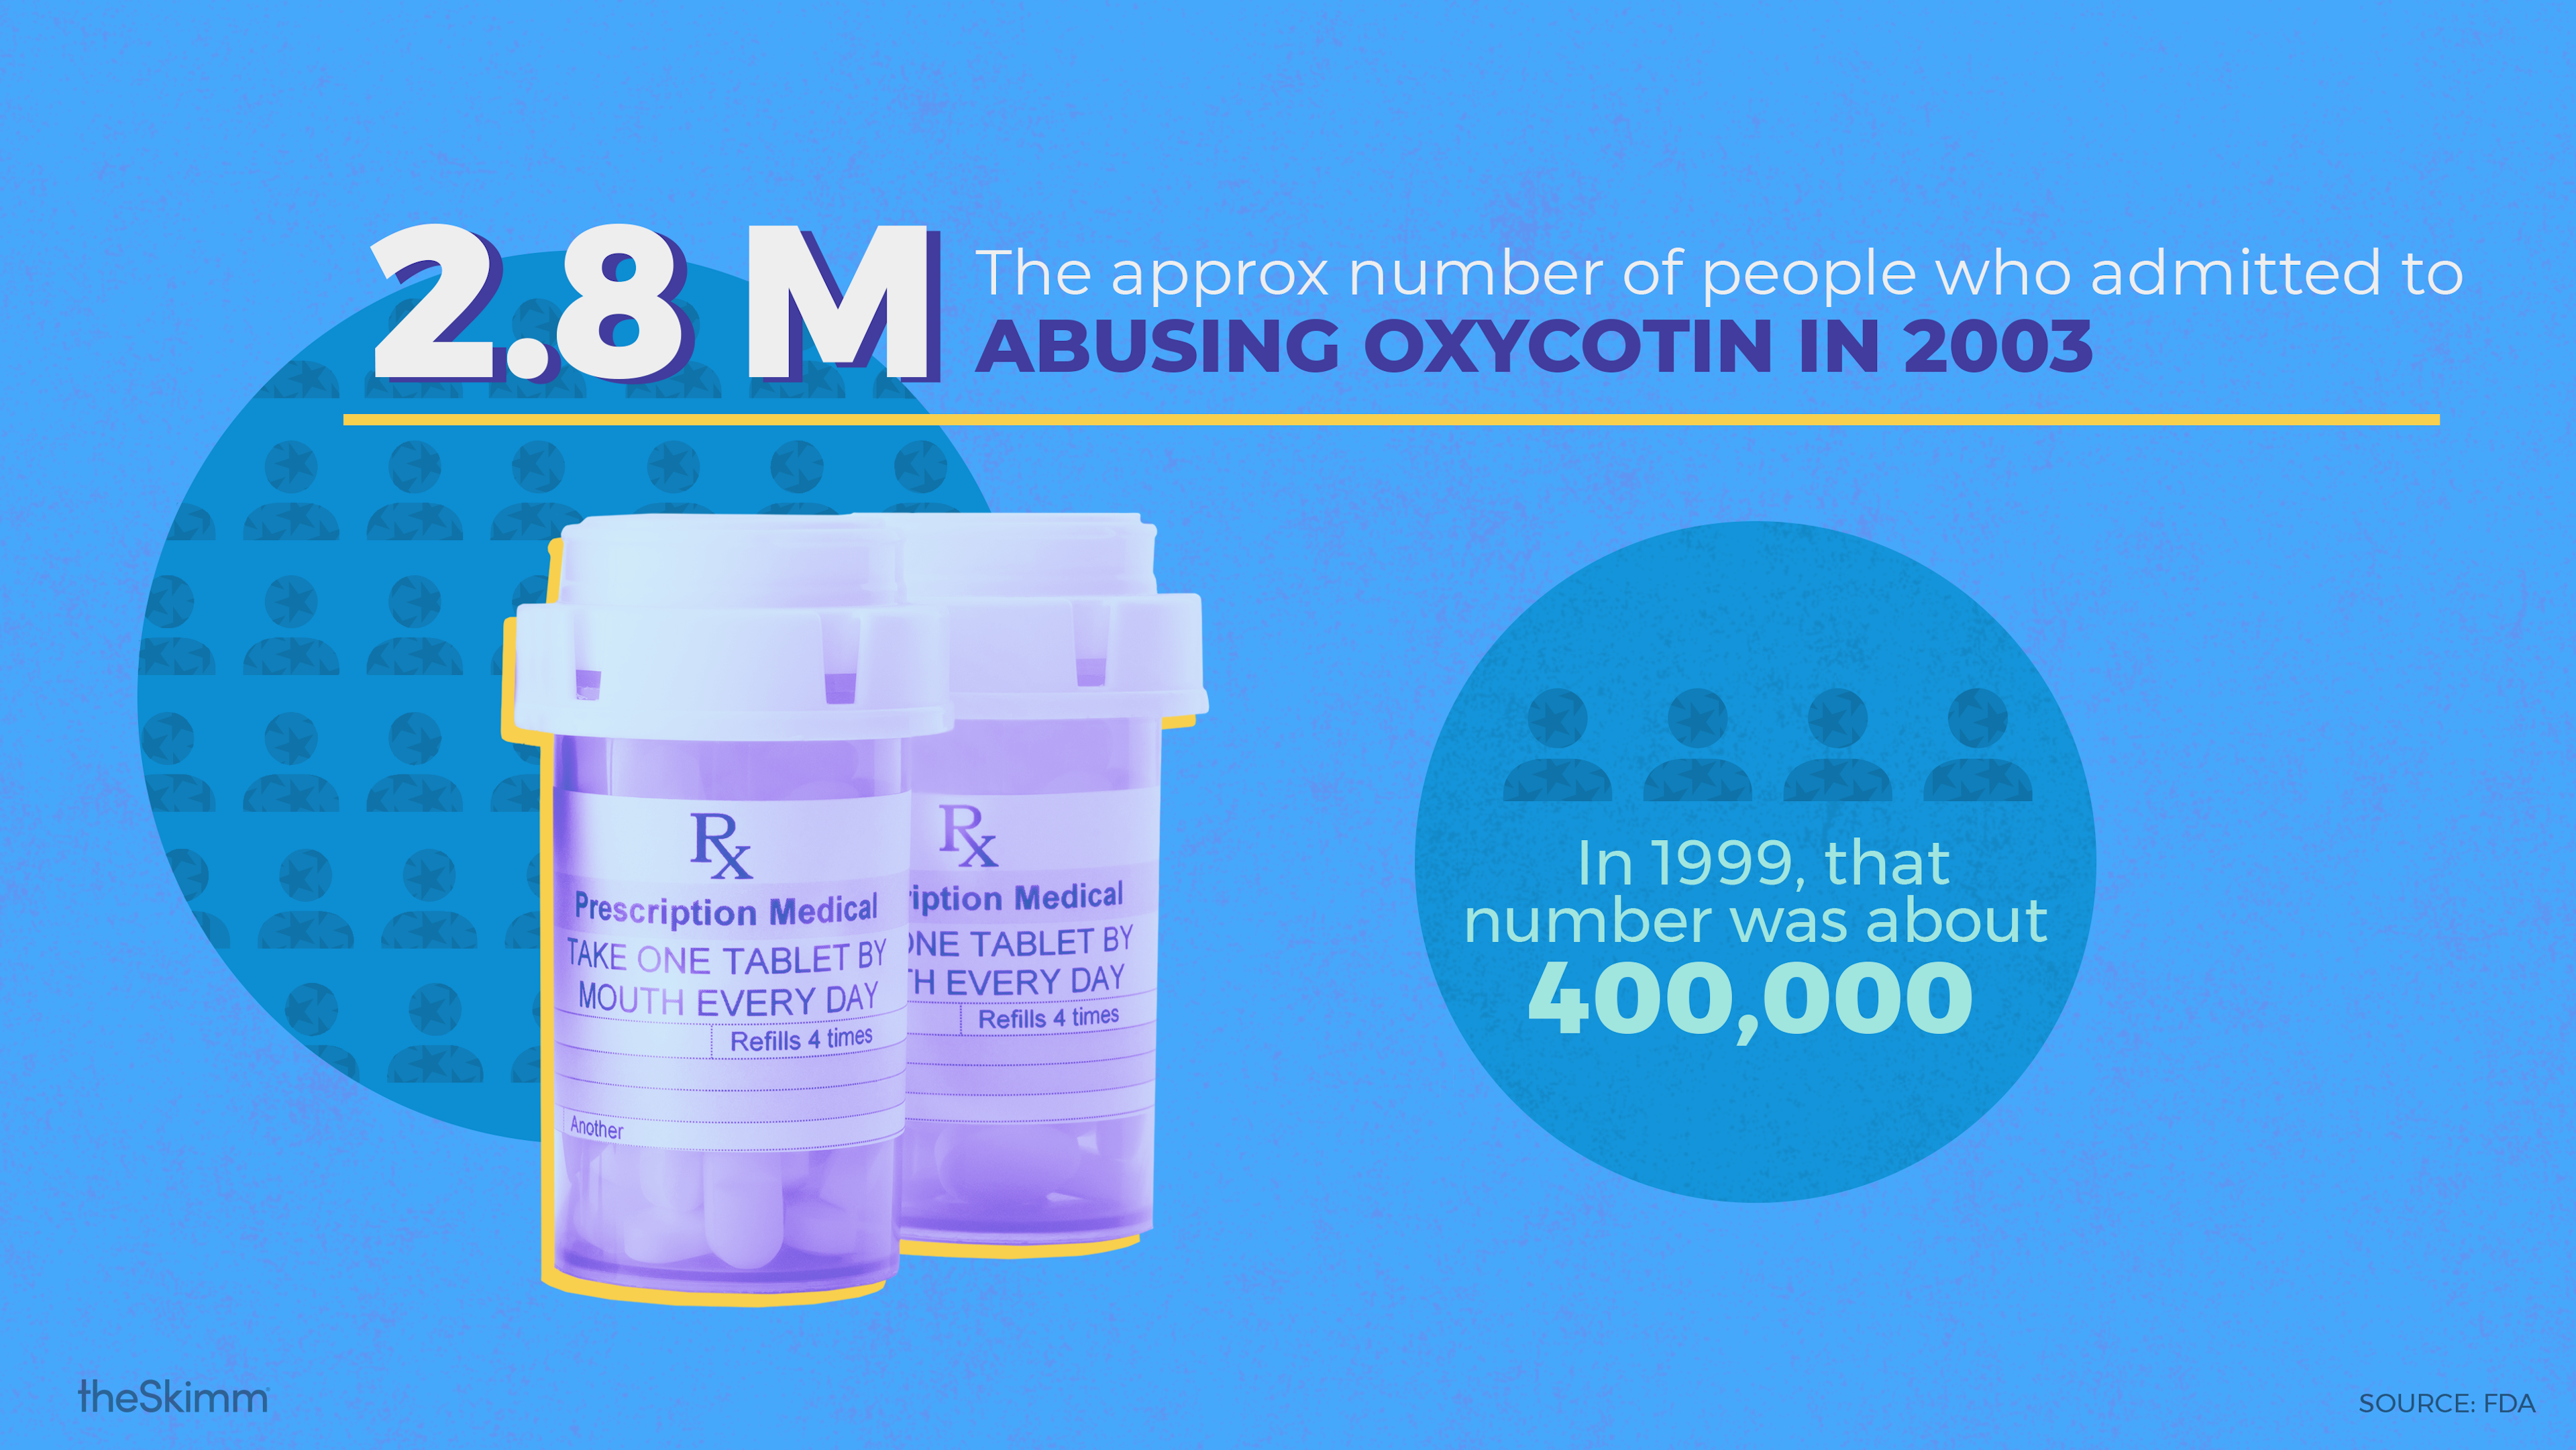 2.8M is the approximate number of people who admitted to abusing oxycotin in 2003. In 1999, that number was about 400,000.